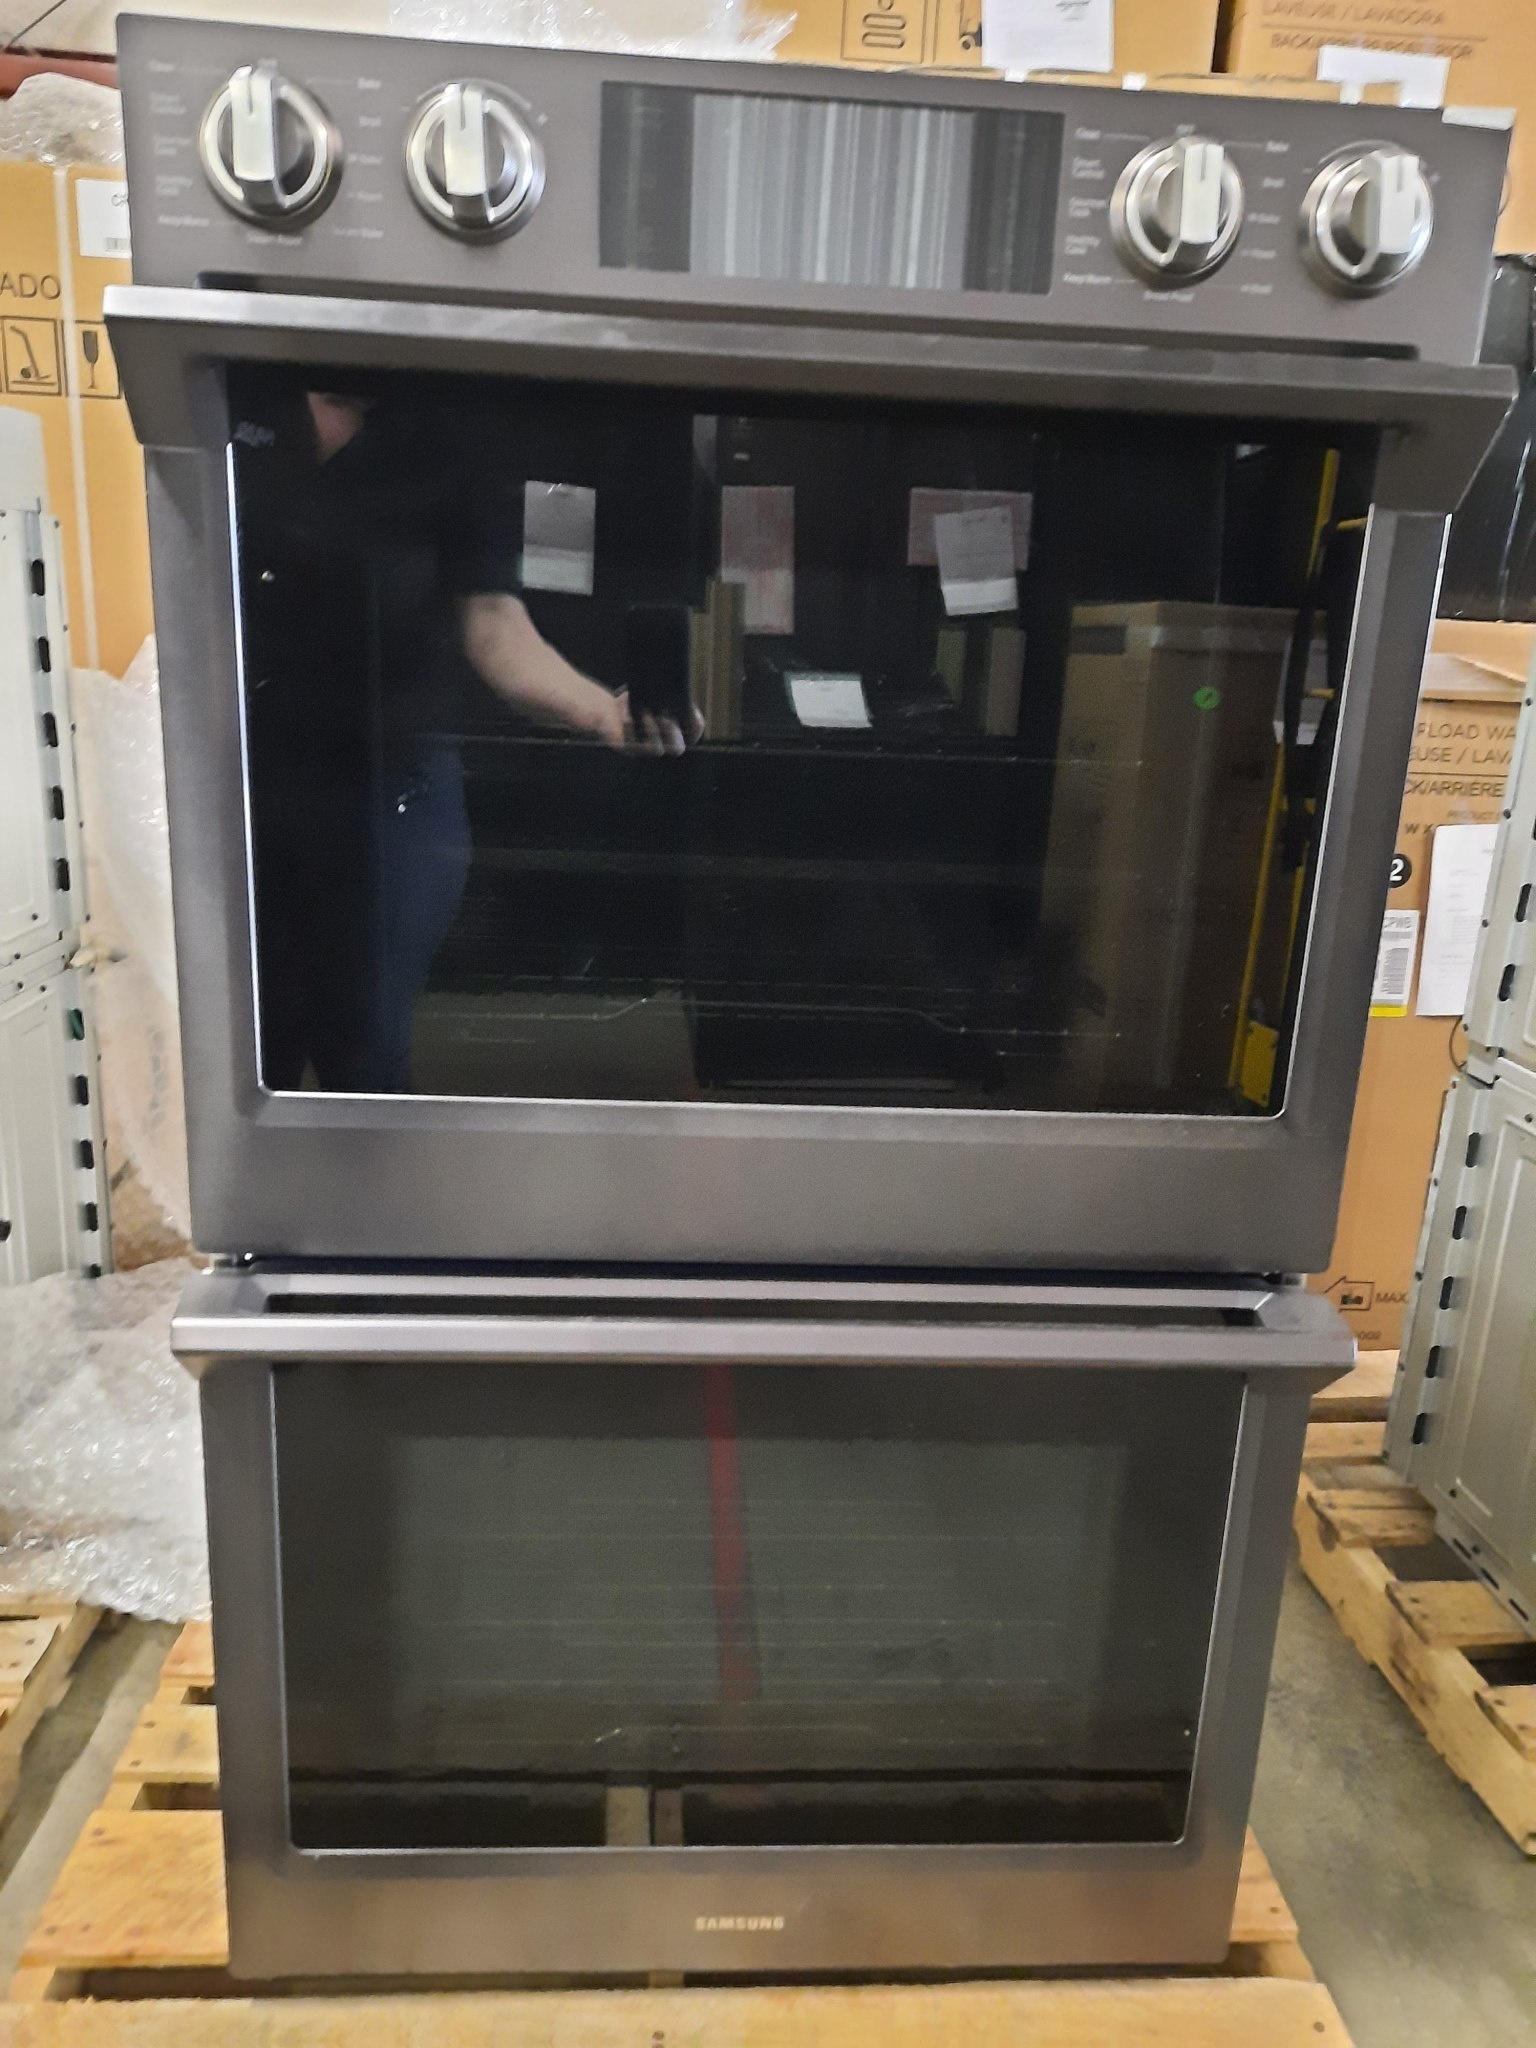 Samsung *NV51K7770DG/AA   *refurbished*  30 in. Double Electric Wall Oven with Steam Cook, Flex Duo and Dual Convection in Fingerprint Resistant Black Stainless